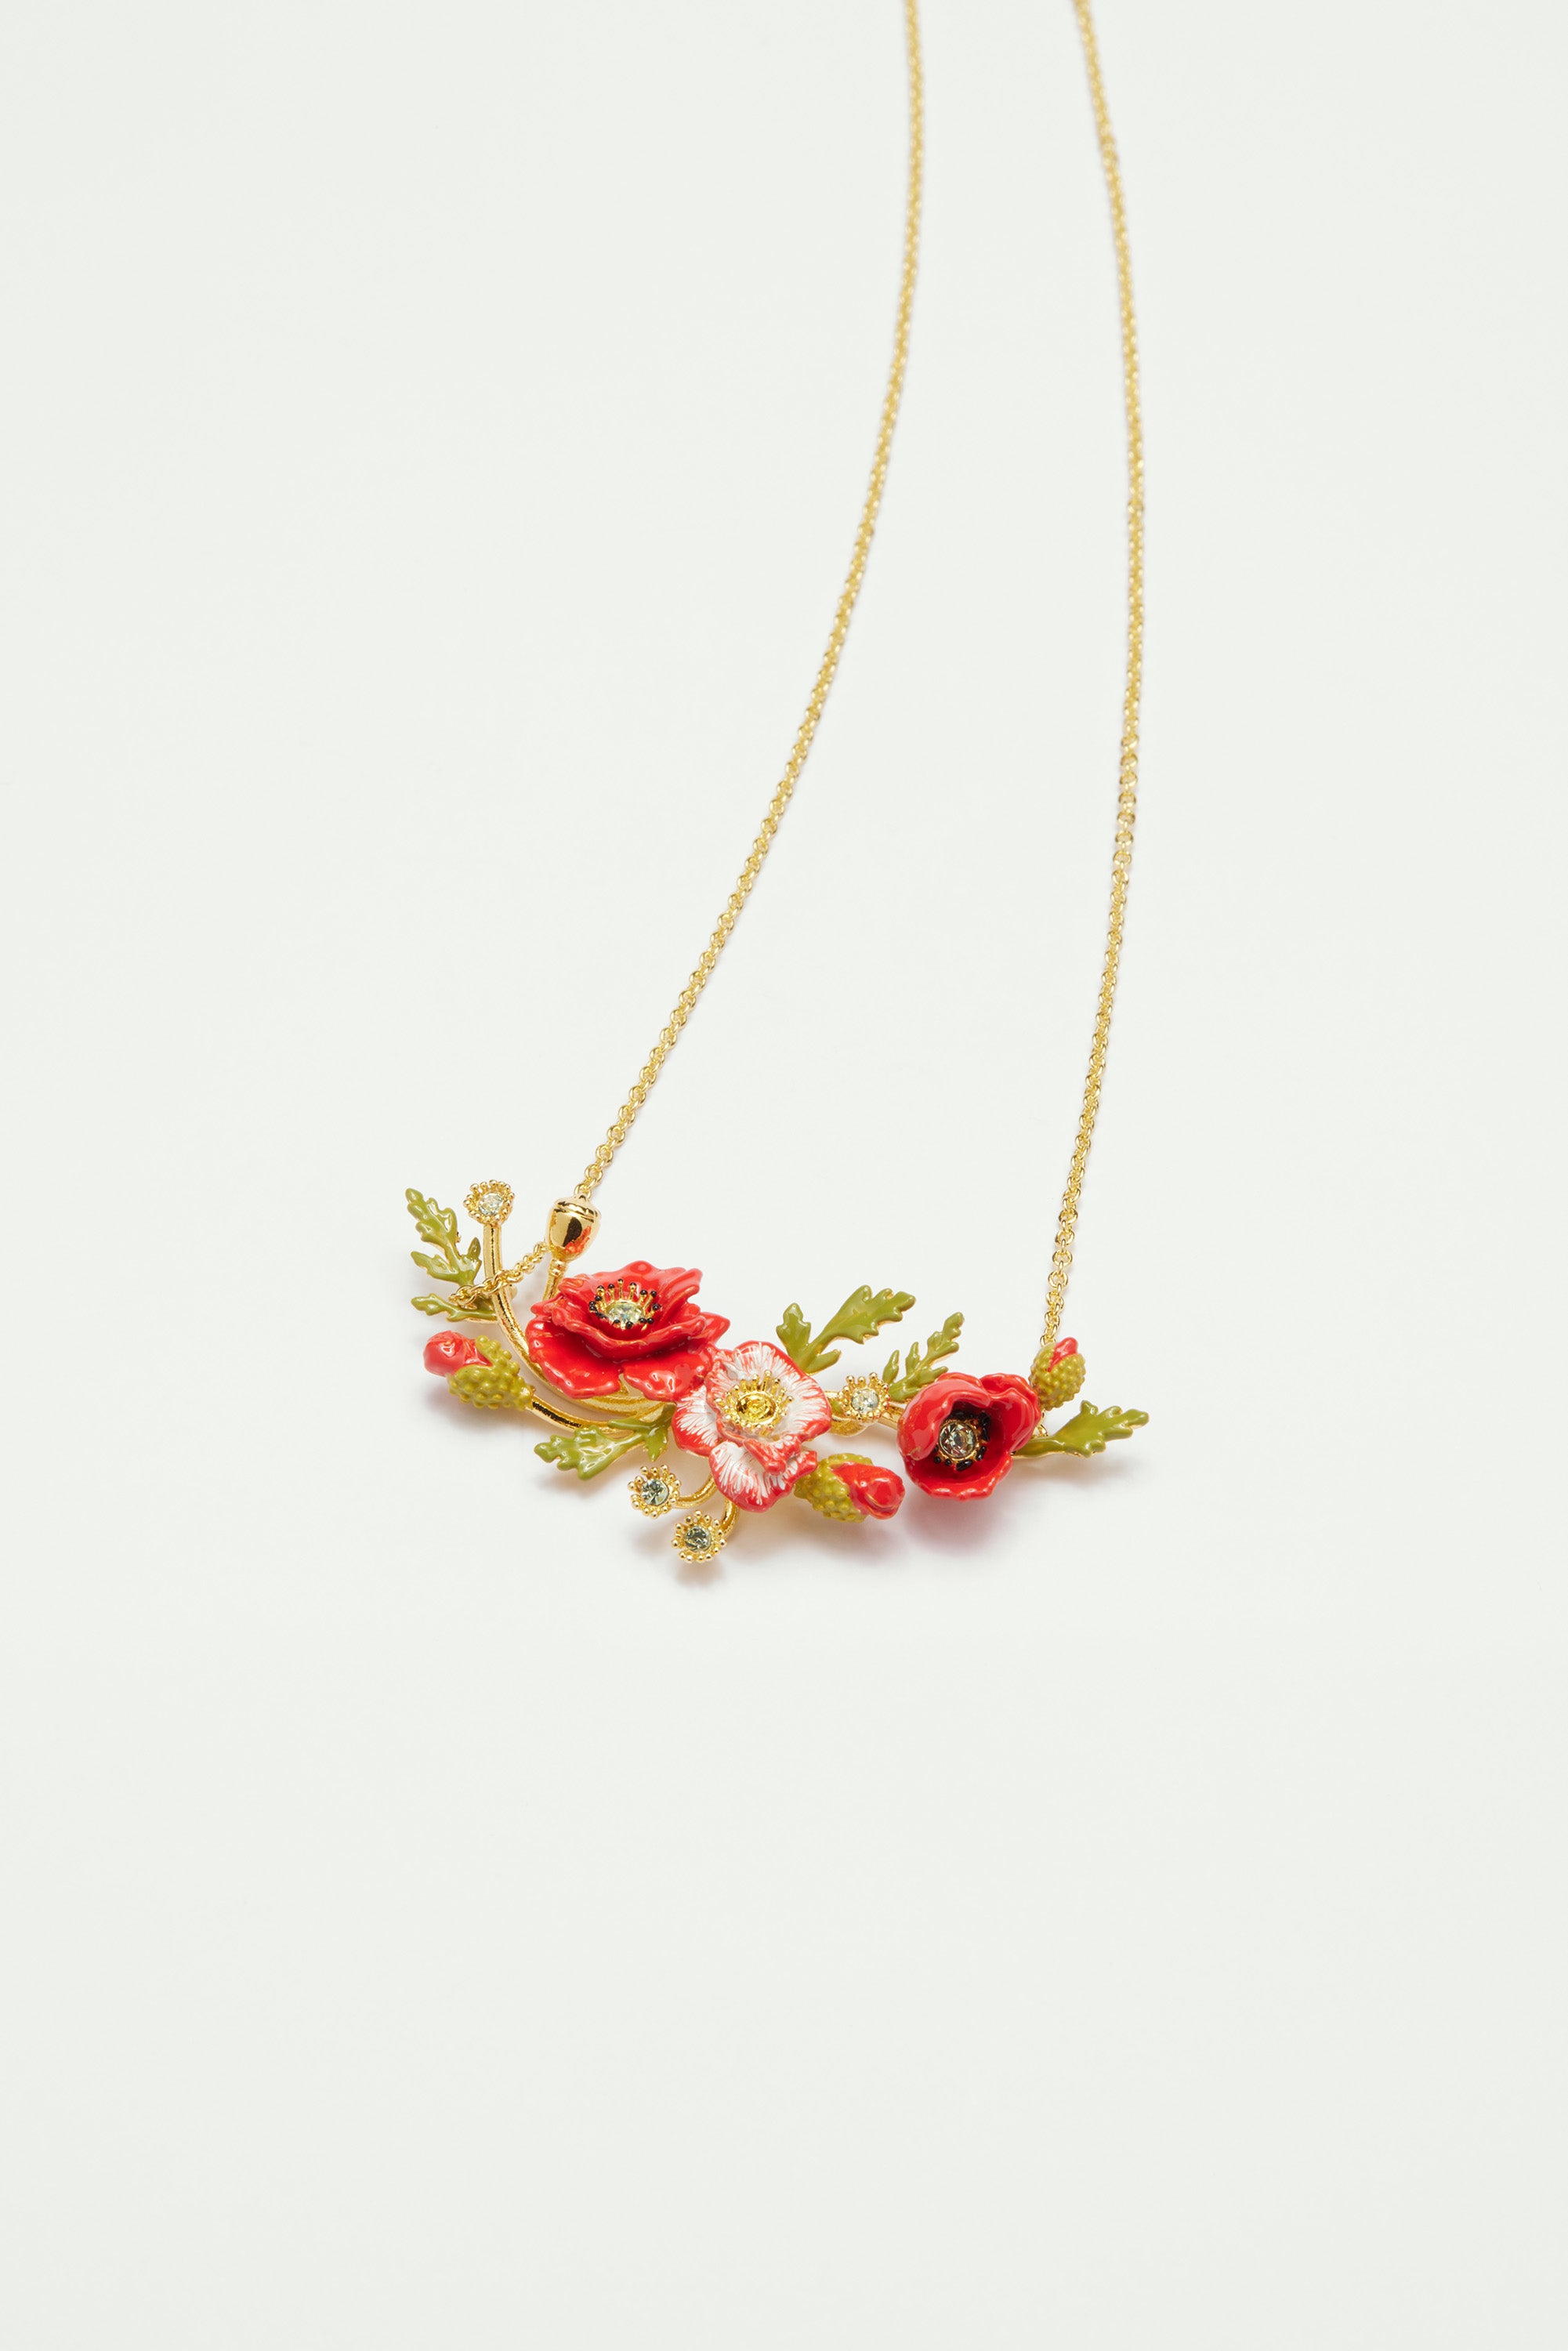 Poppy and daisy statement necklace